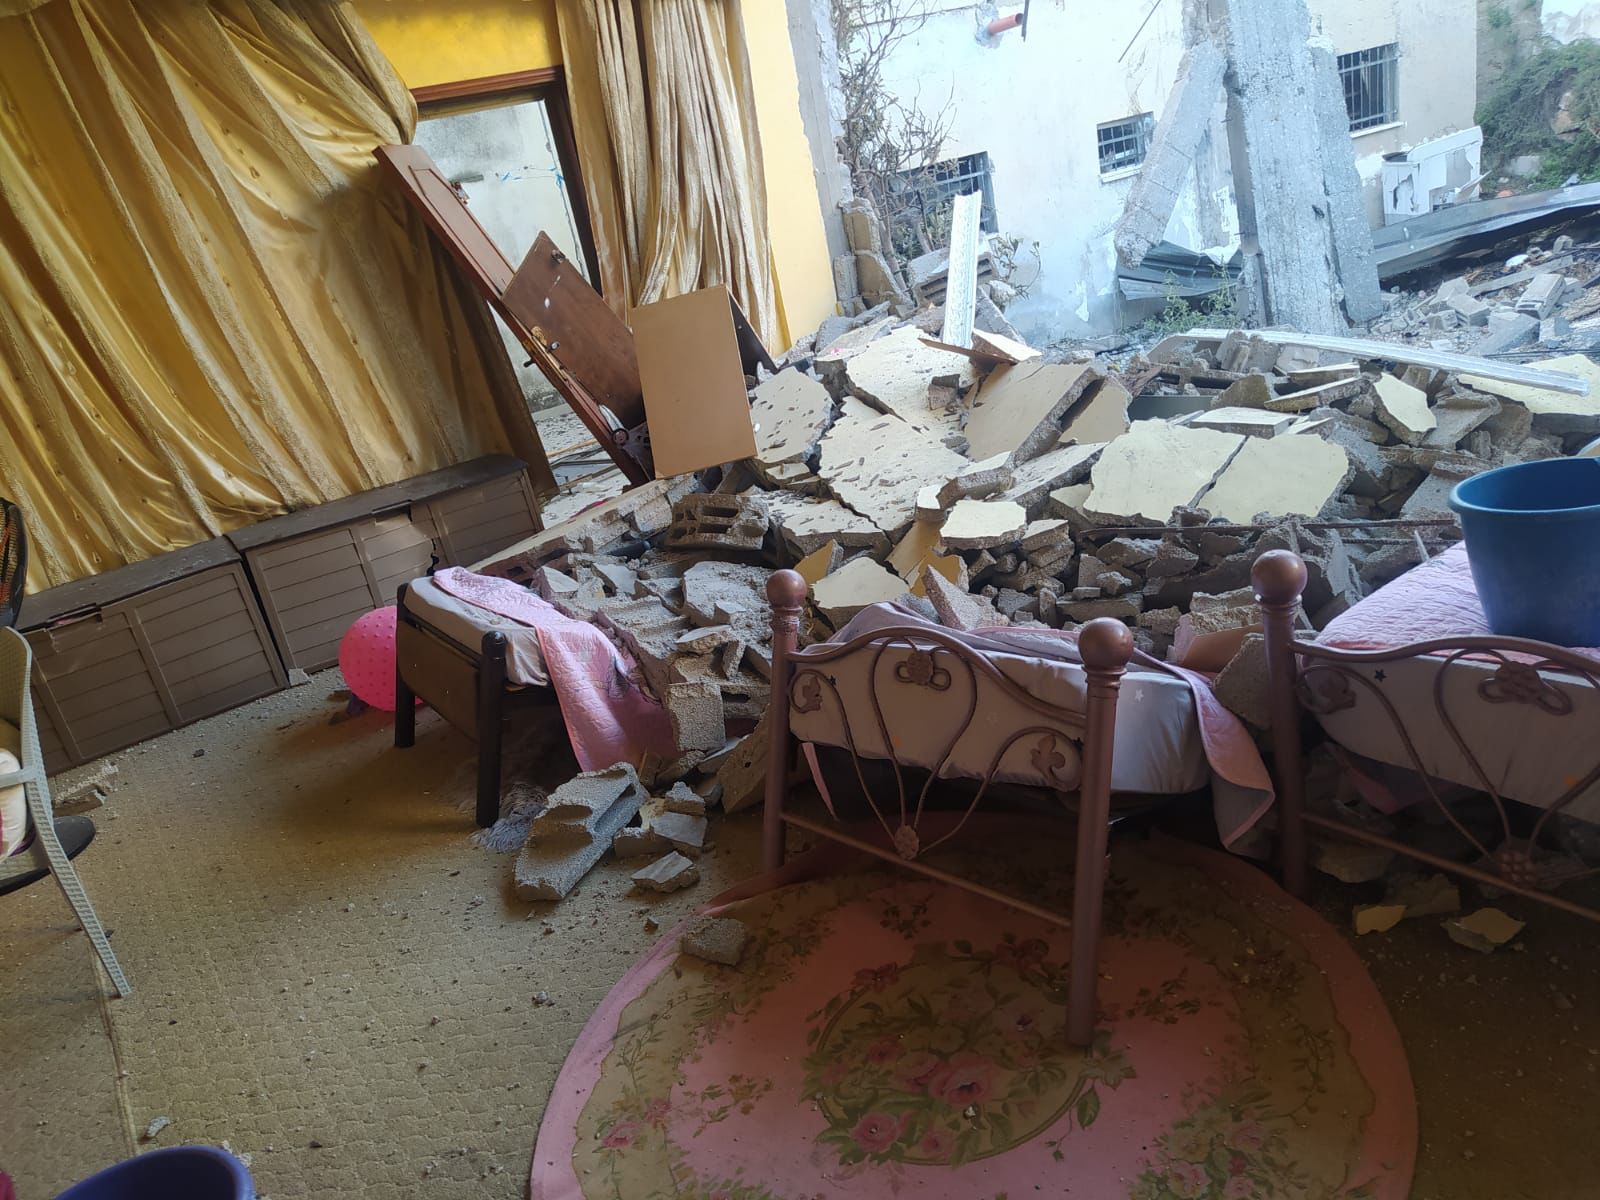 Al-Shalabi returned to her home in Jenin after the Israeli assault to find in ruins (Provided)